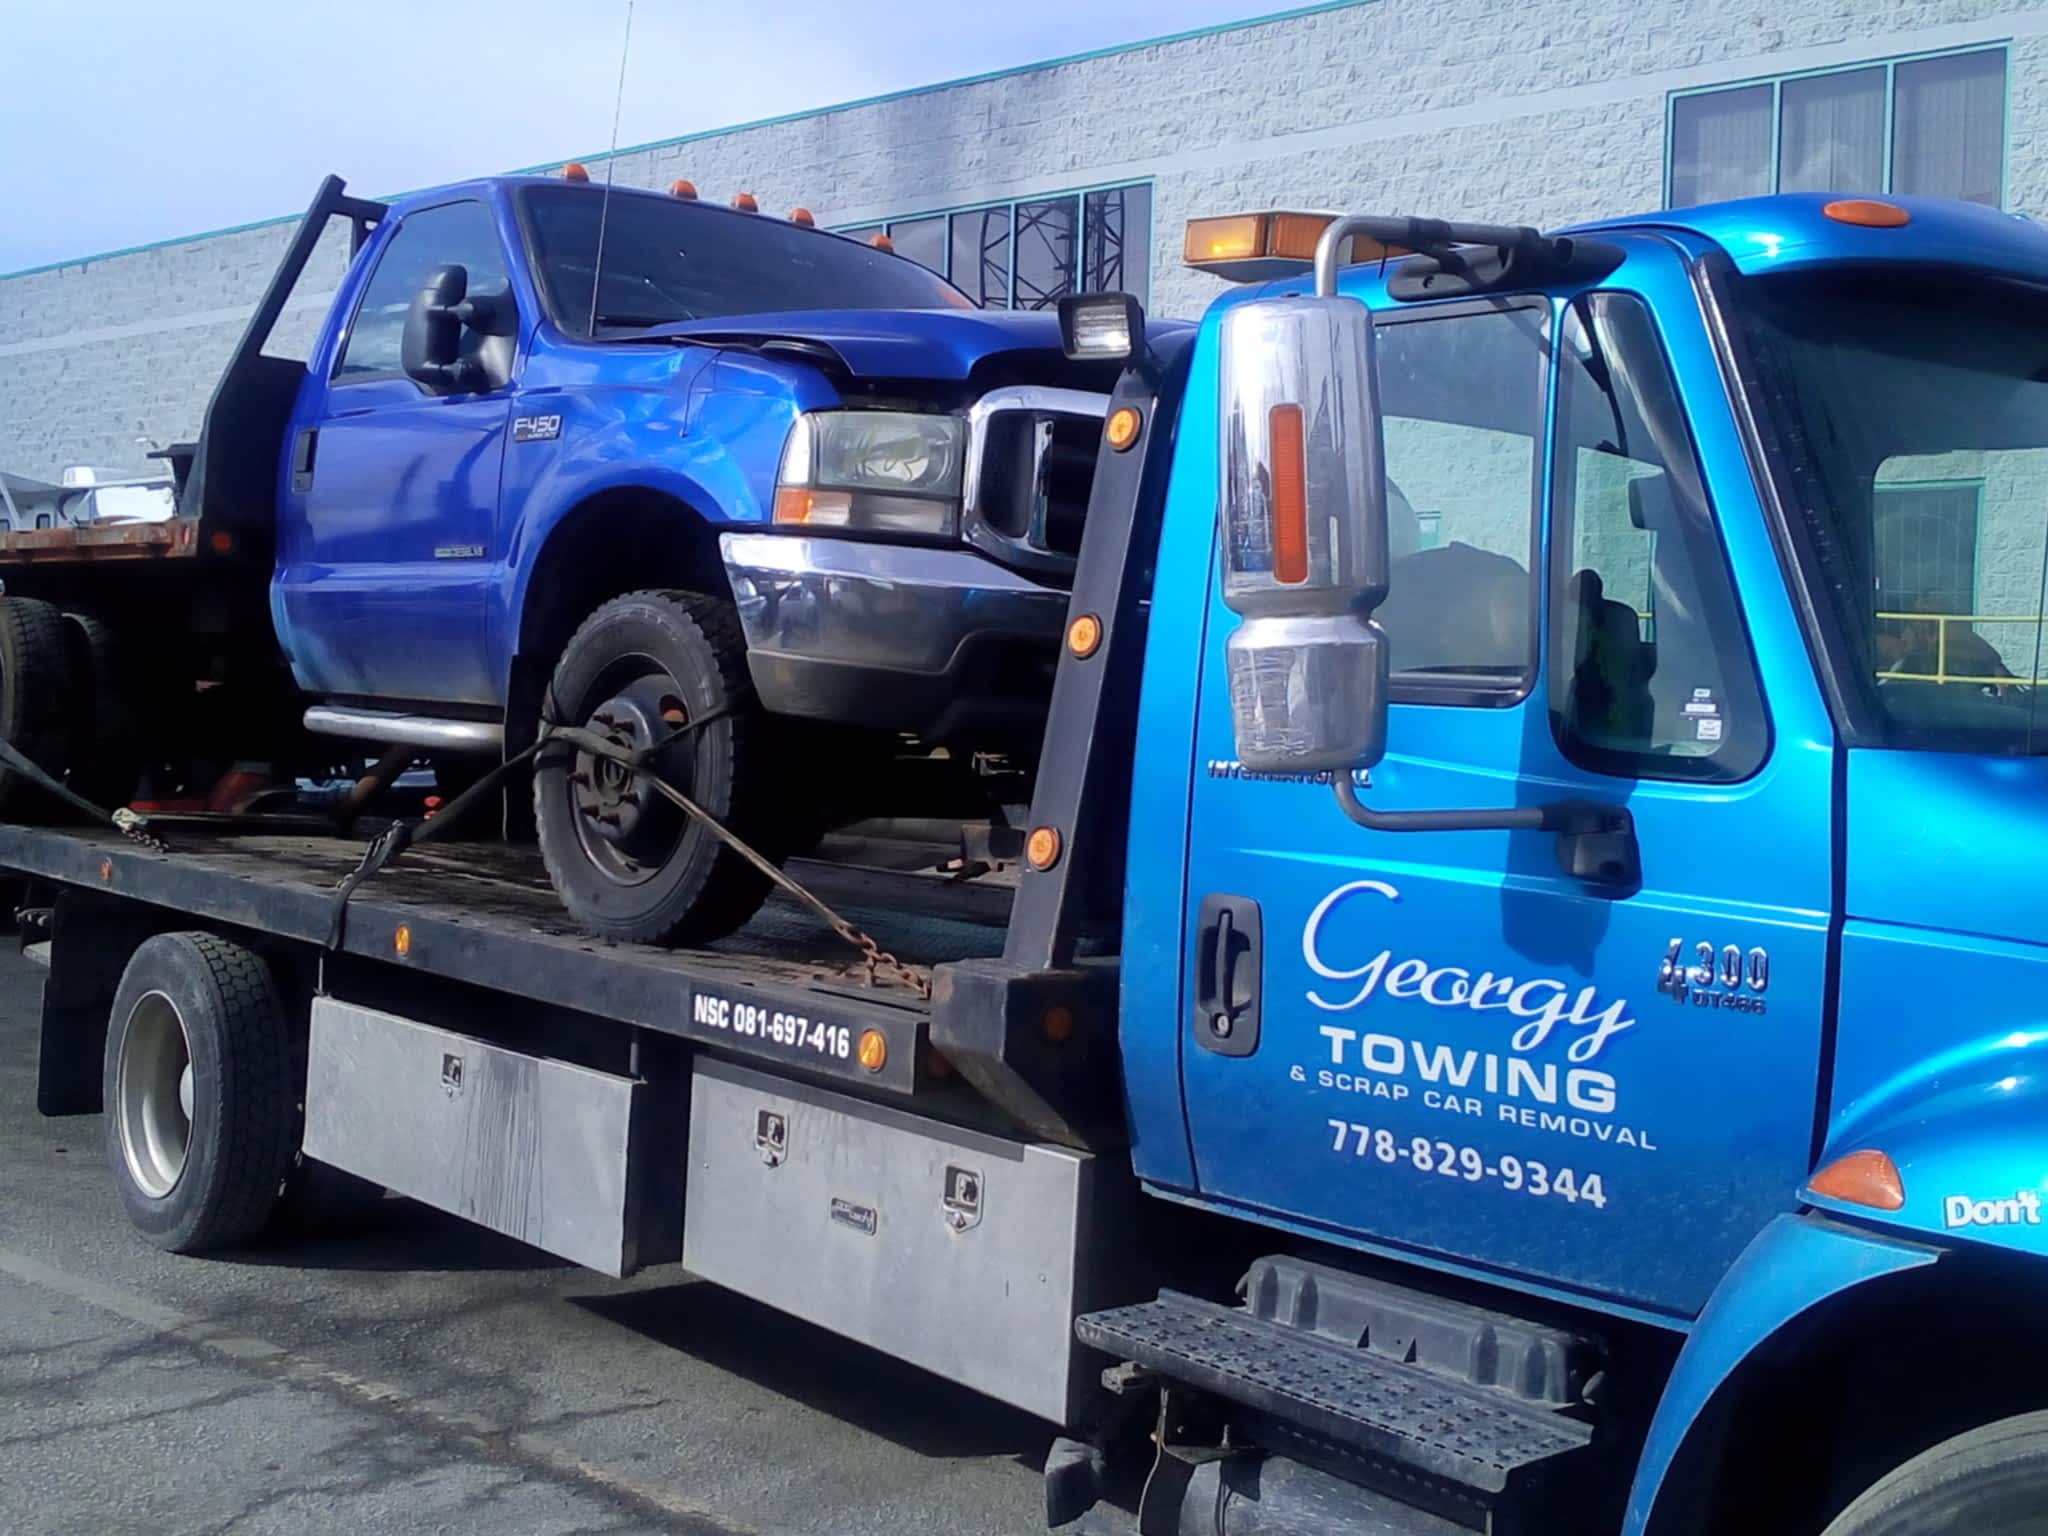 photo Georgry Towing & Scrap Car Removal